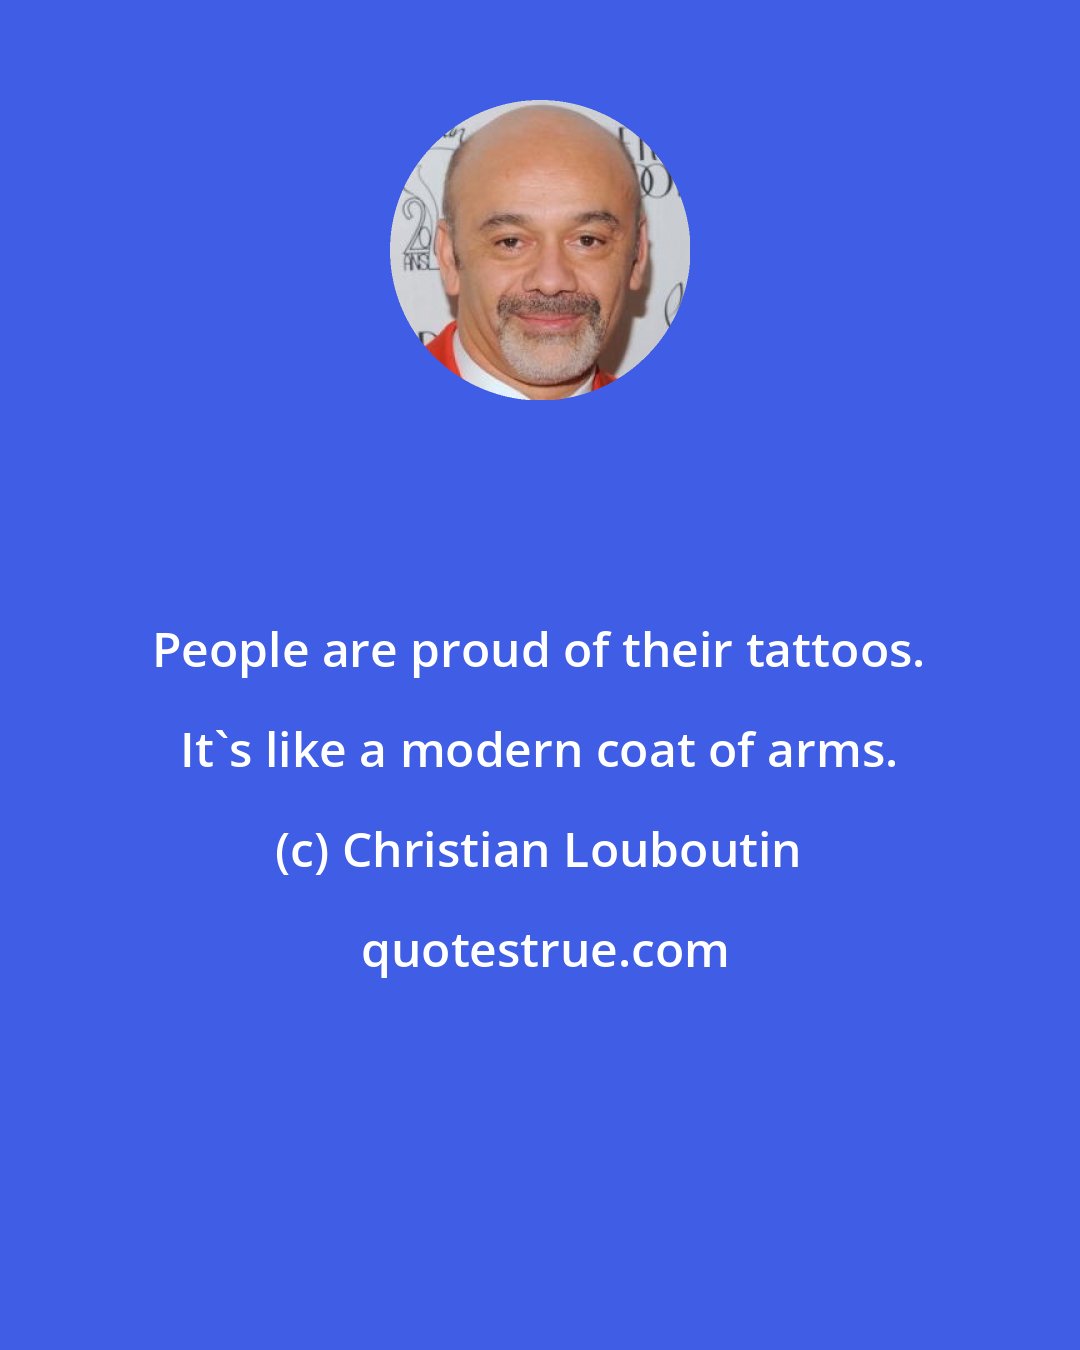 Christian Louboutin: People are proud of their tattoos. It's like a modern coat of arms.